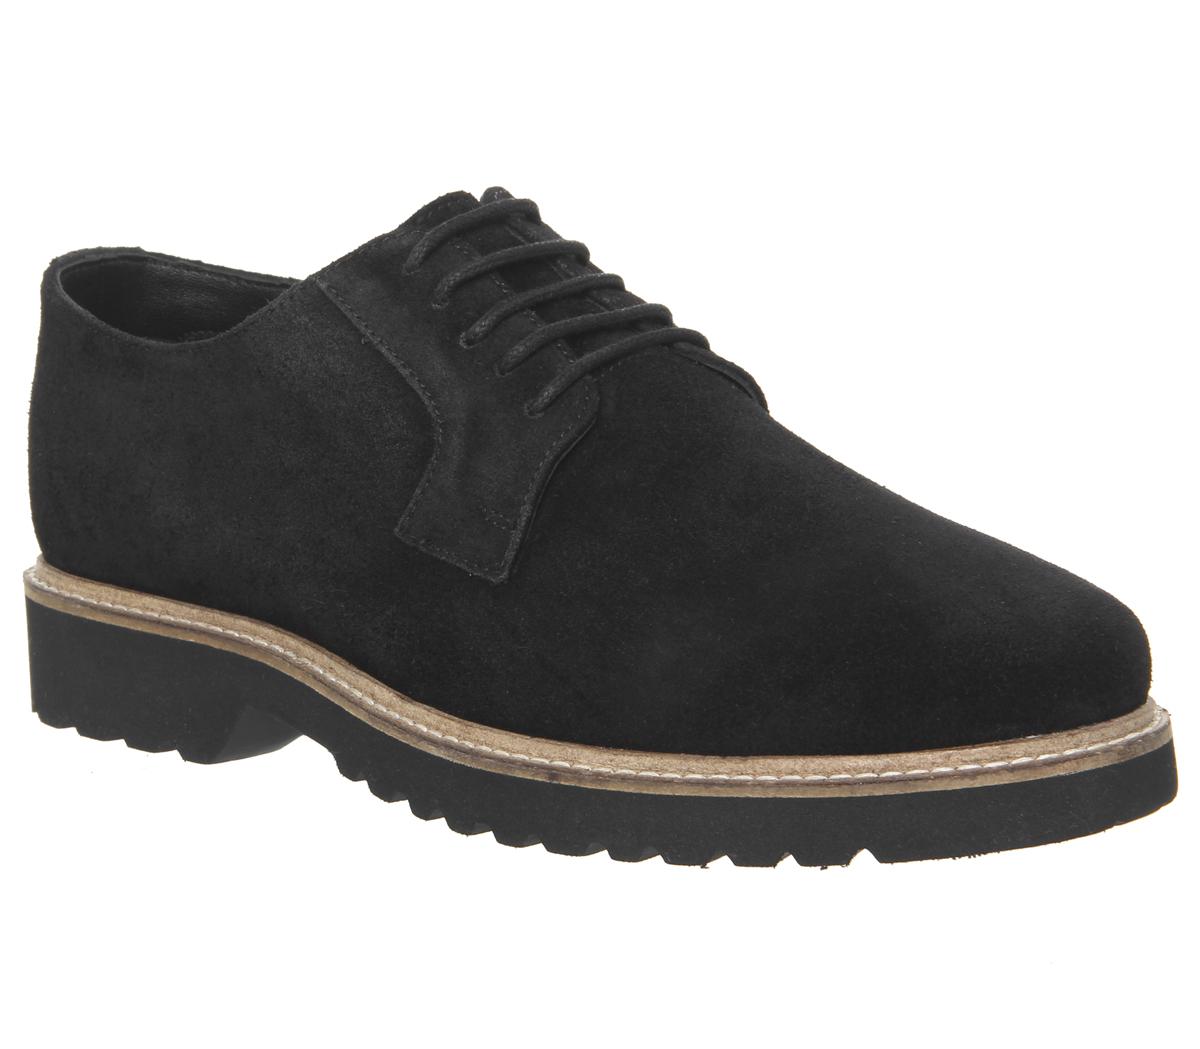 Illuminate Derby Shoes Black Suede - Casual